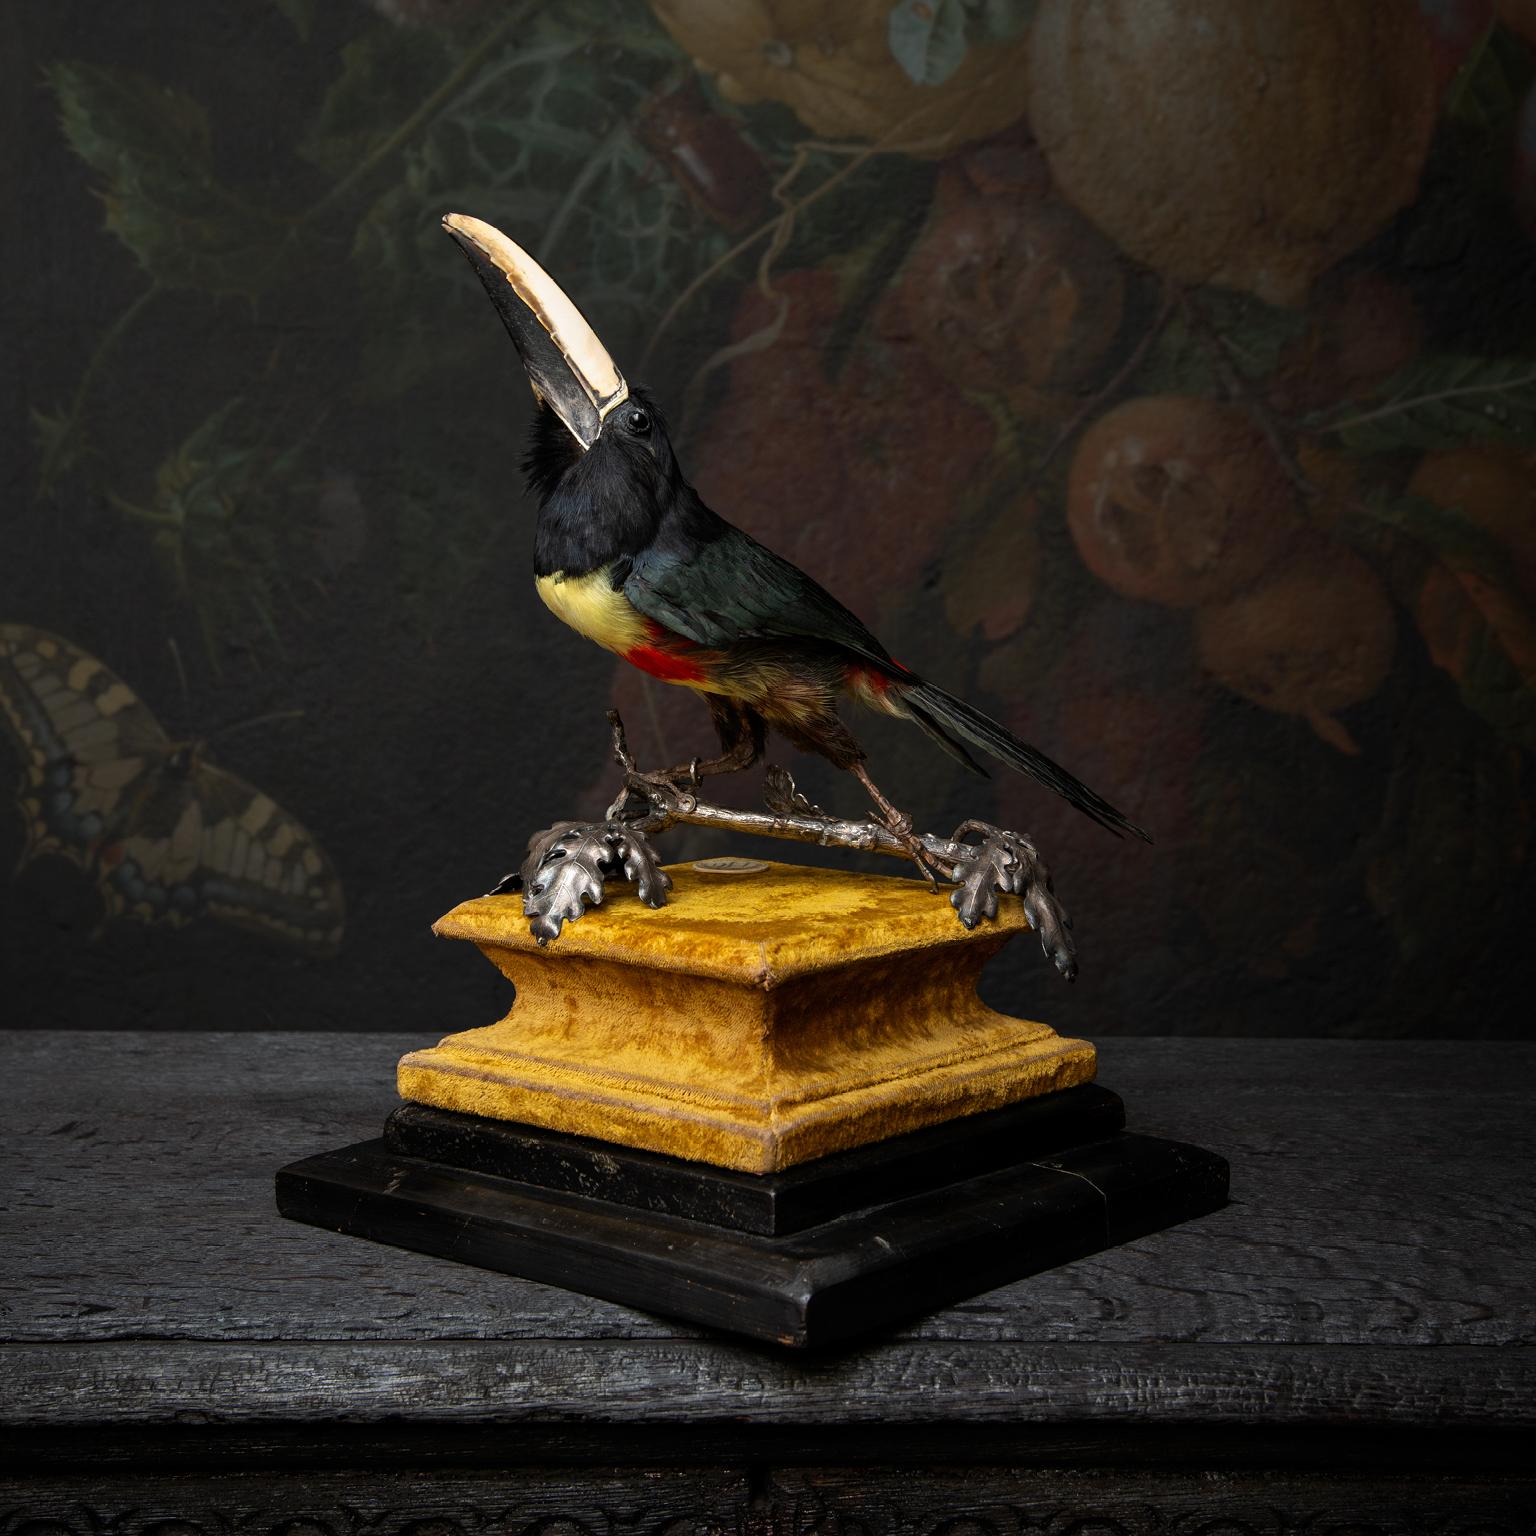 The Black-necked Aracari (Pteroglossus aracari) is part of the Toucan family. This one is striking a pose on a silver plated branch with silver plated oak leaves lying around. This all sits on an antique velvet base and ebonized wood. A proud piece.